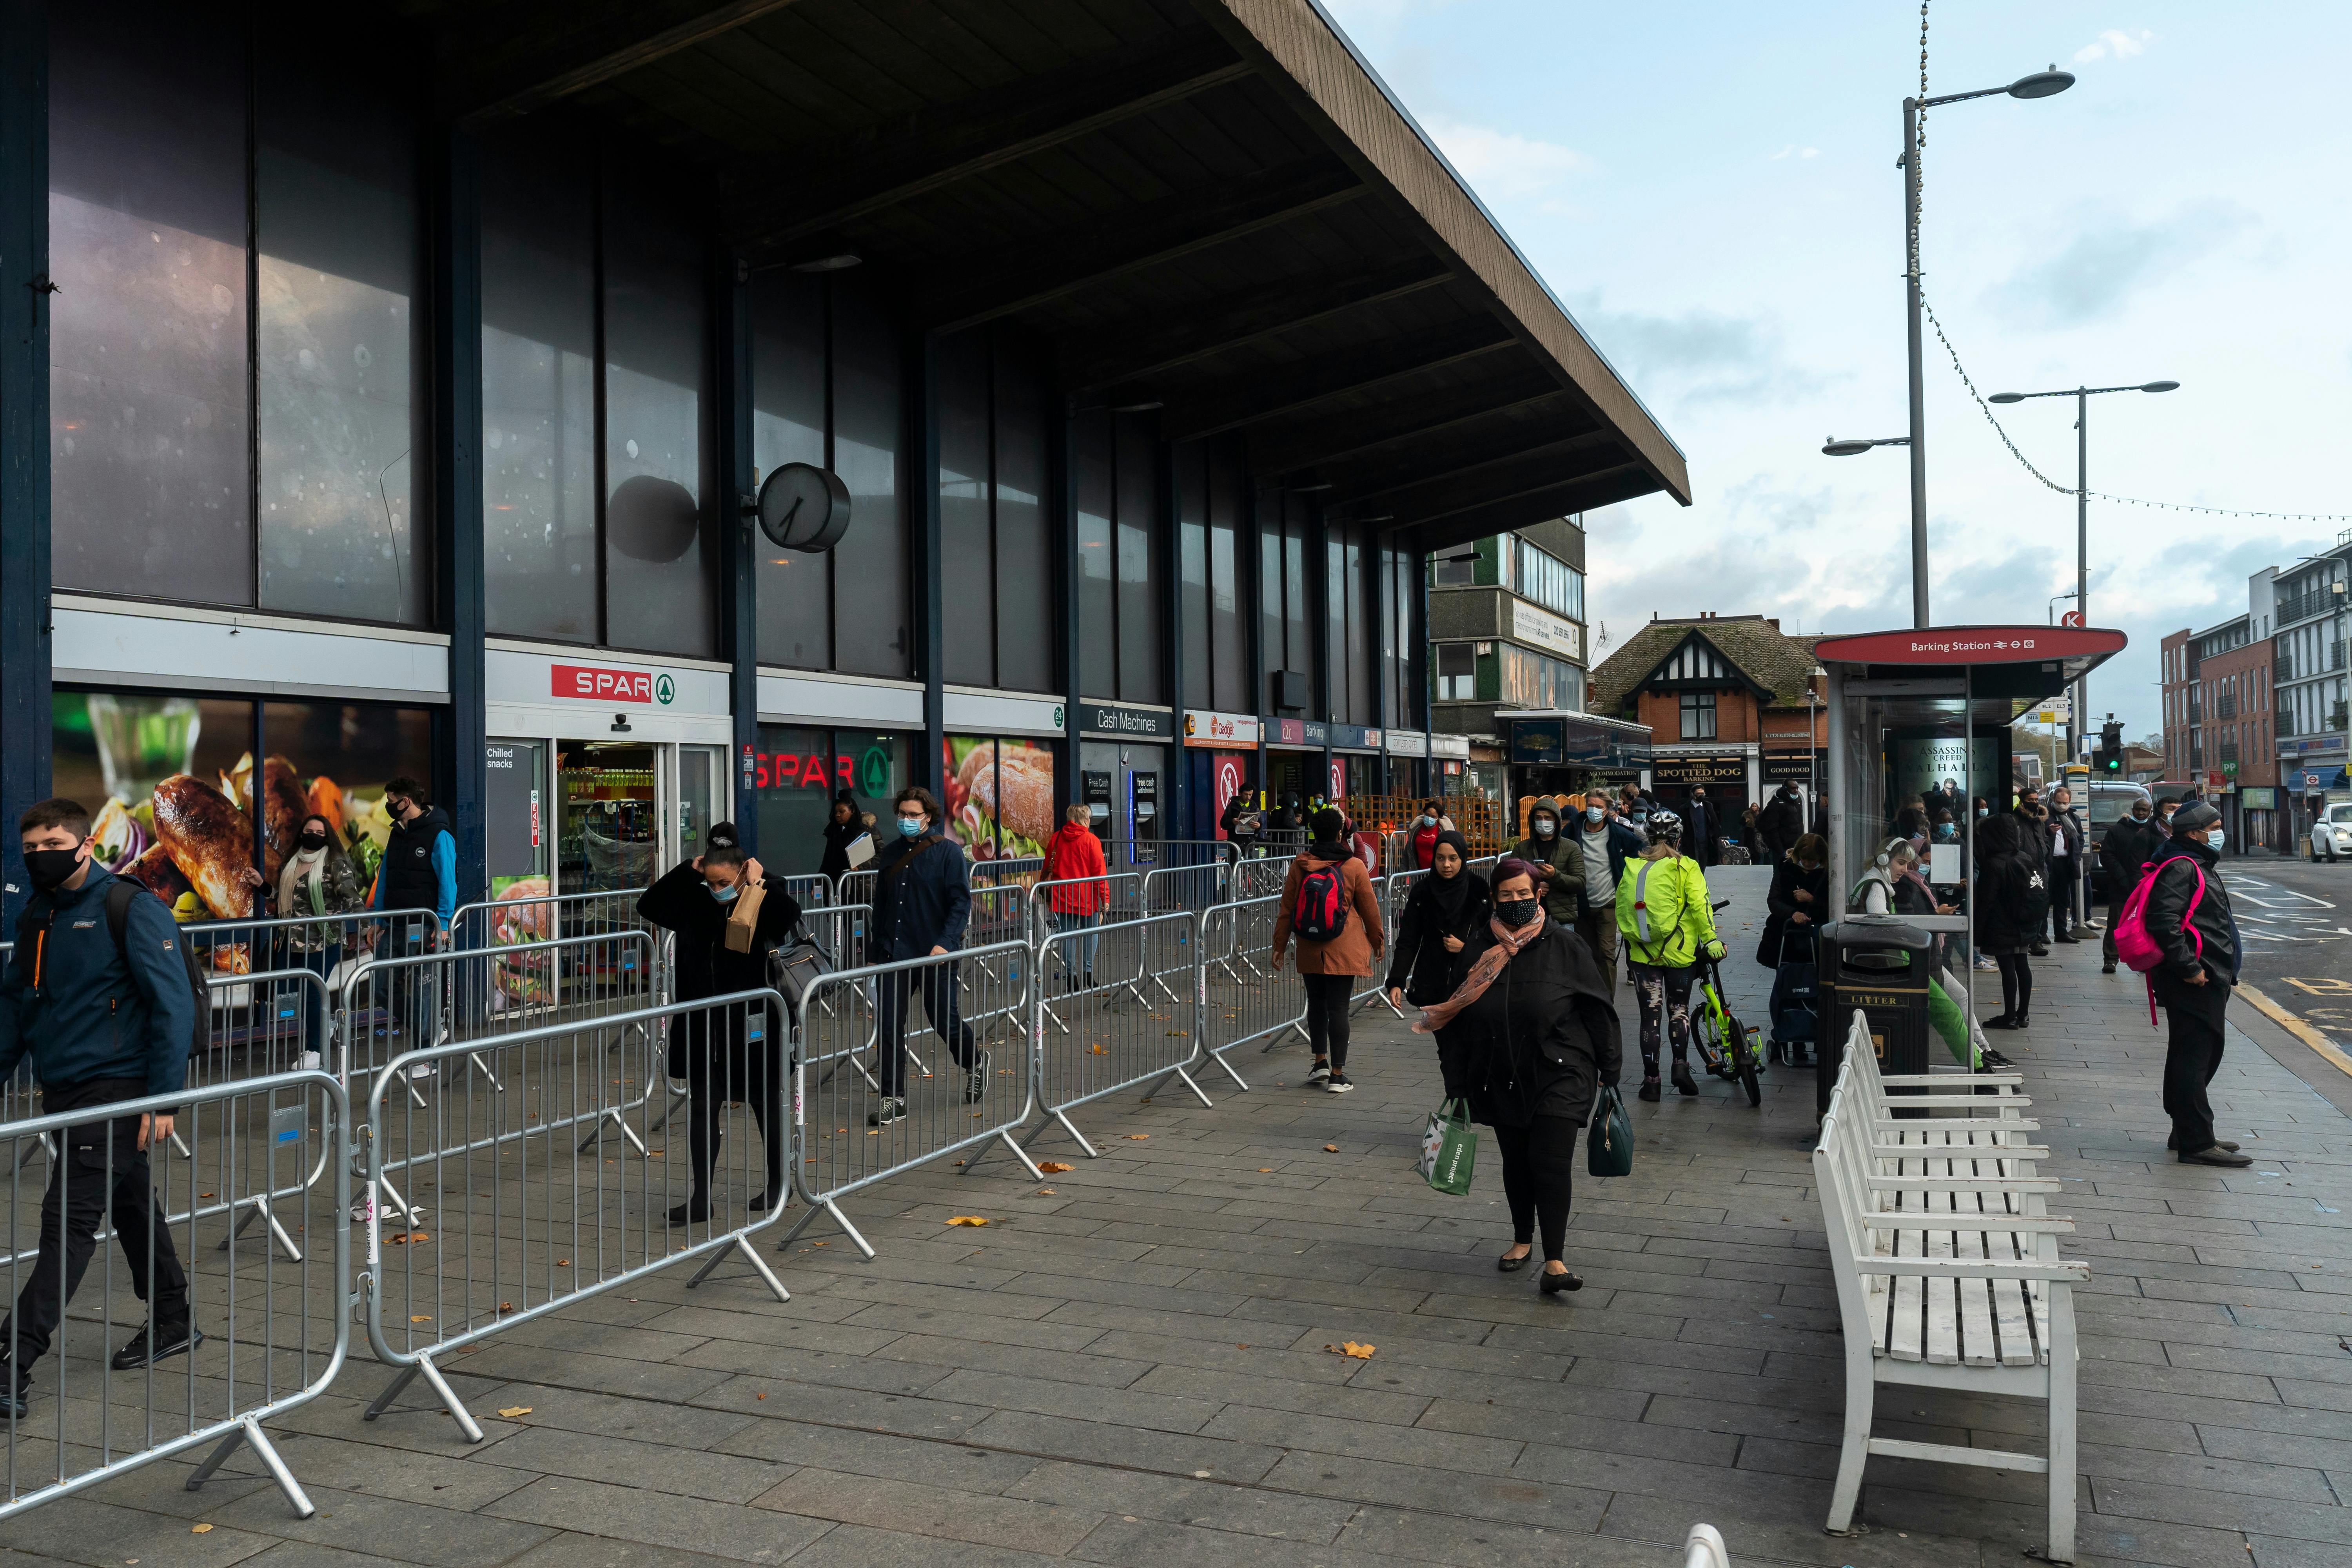 The barriers increase crowding on the station forecourt